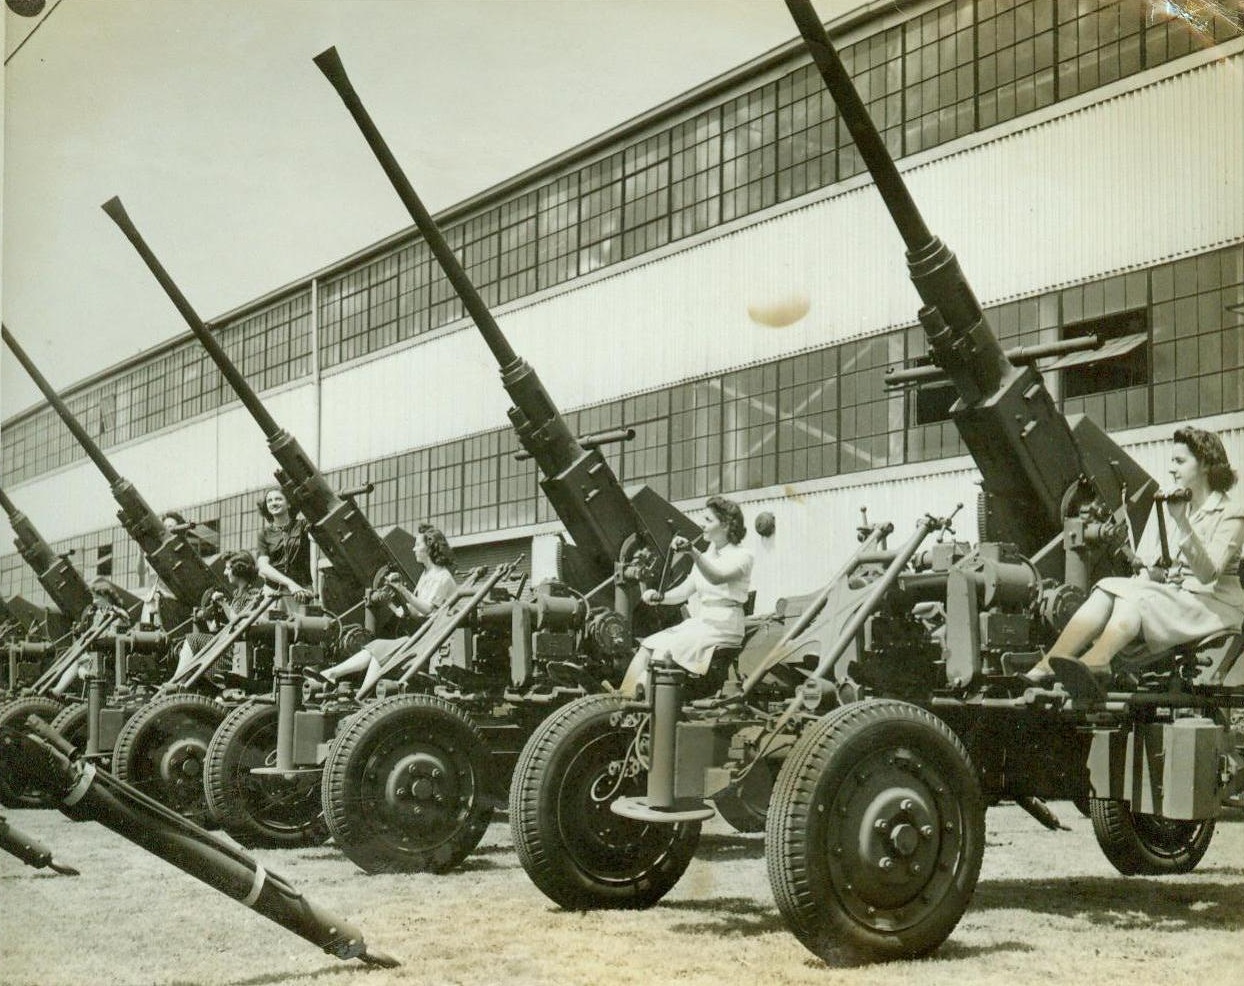 Big Aircraft Guns Easily Maneuvered, 8/28/1943. Akron, Ohio- These Big Bofors Anti-Aircraft guns produced by Firestone Tire and Rubber Co., here are easily maneuvered, as demonstrated by the girls manning the guns in the above photo. Guns are being produes in quantities on production lines here;